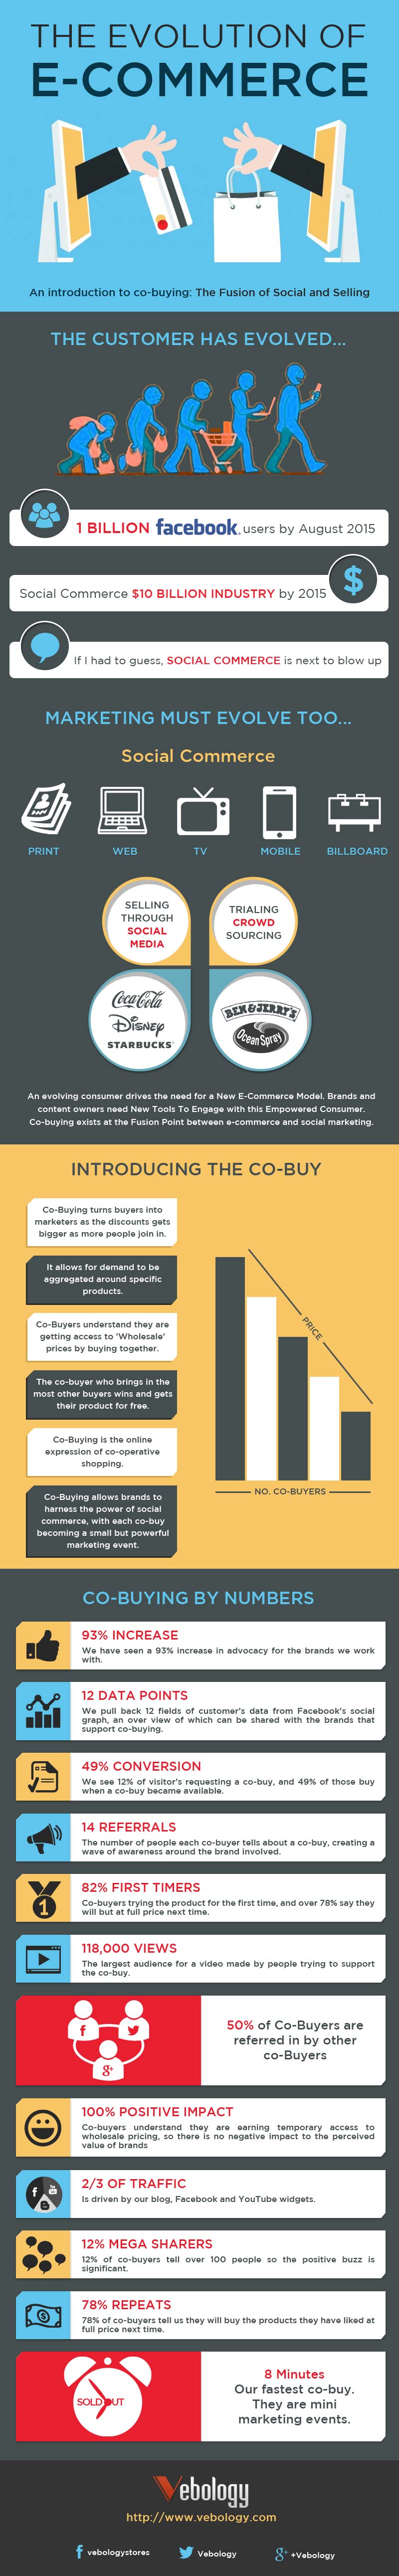 The Evolution of eCommerce Infographic